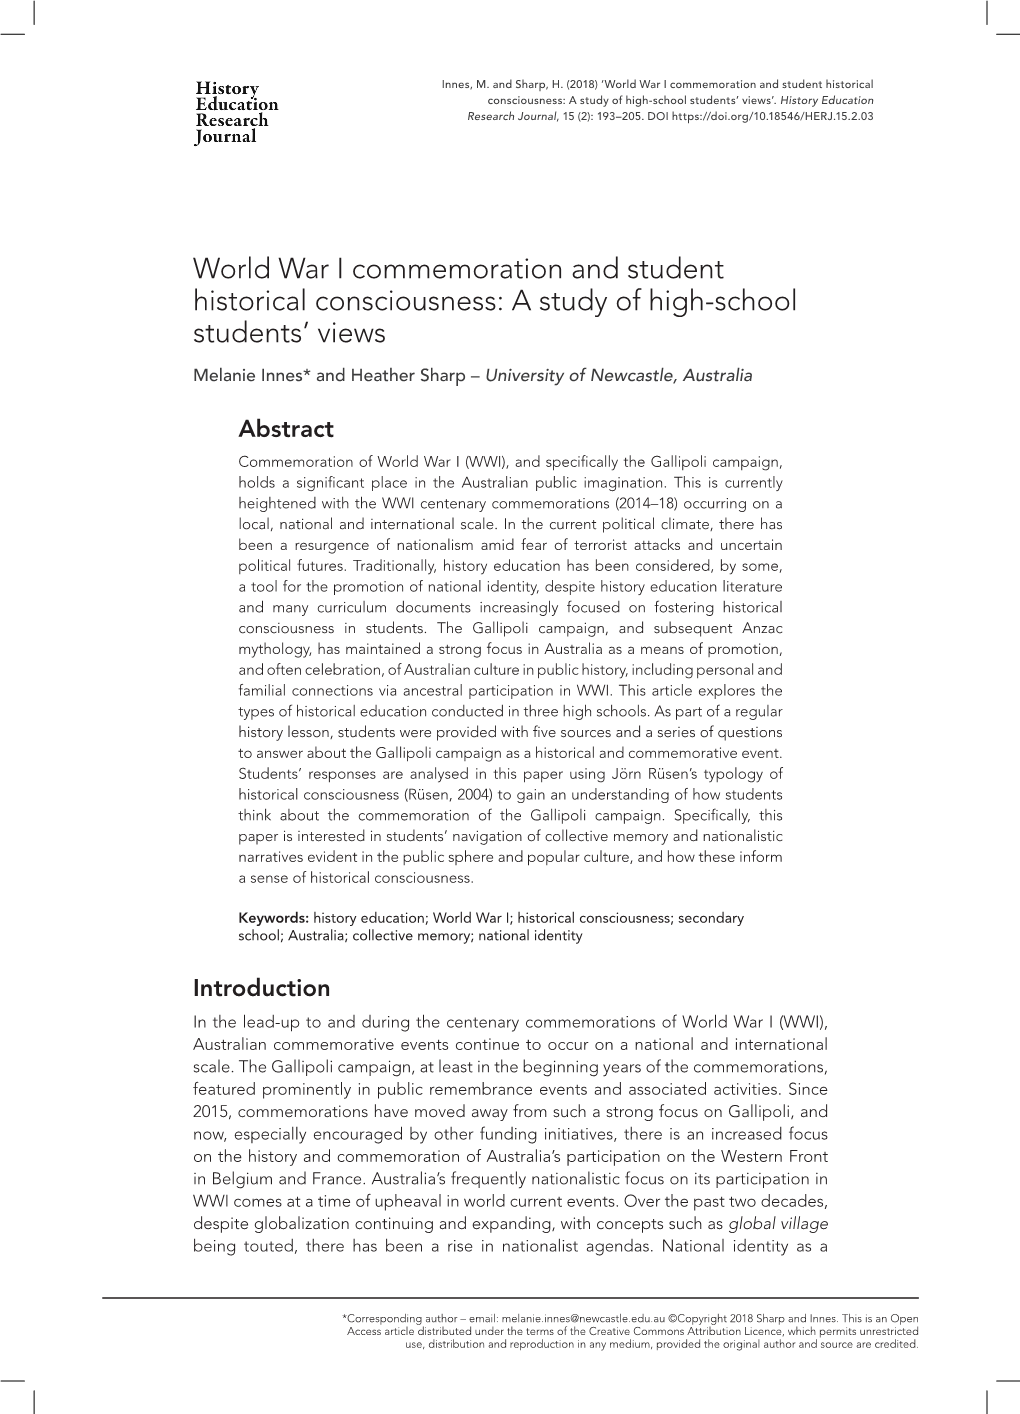 World War I Commemoration and Student Historical Consciousness: a Study of High-School Students’ Views’